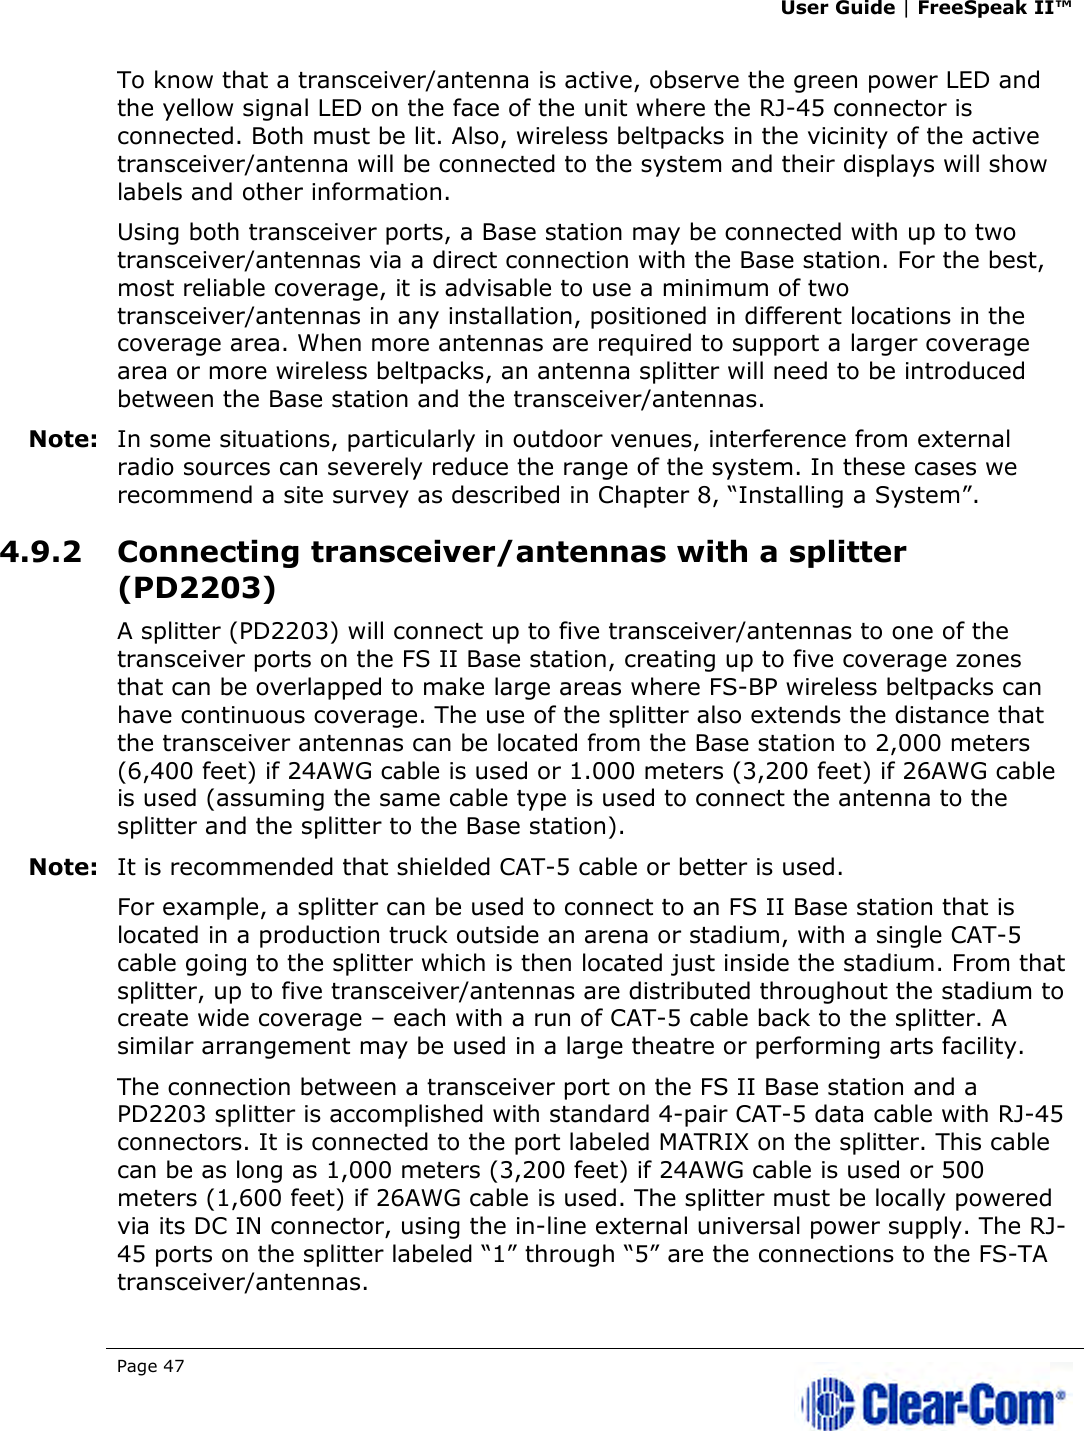 User Guide | FreeSpeak II™  Page 47   To know that a transceiver/antenna is active, observe the green power LED and the yellow signal LED on the face of the unit where the RJ-45 connector is connected. Both must be lit. Also, wireless beltpacks in the vicinity of the active transceiver/antenna will be connected to the system and their displays will show labels and other information.  Using both transceiver ports, a Base station may be connected with up to two transceiver/antennas via a direct connection with the Base station. For the best, most reliable coverage, it is advisable to use a minimum of two transceiver/antennas in any installation, positioned in different locations in the coverage area. When more antennas are required to support a larger coverage area or more wireless beltpacks, an antenna splitter will need to be introduced between the Base station and the transceiver/antennas. Note: In some situations, particularly in outdoor venues, interference from external radio sources can severely reduce the range of the system. In these cases we recommend a site survey as described in Chapter 8, “Installing a System”.  4.9.2 Connecting transceiver/antennas with a splitter (PD2203) A splitter (PD2203) will connect up to five transceiver/antennas to one of the transceiver ports on the FS II Base station, creating up to five coverage zones that can be overlapped to make large areas where FS-BP wireless beltpacks can have continuous coverage. The use of the splitter also extends the distance that the transceiver antennas can be located from the Base station to 2,000 meters (6,400 feet) if 24AWG cable is used or 1.000 meters (3,200 feet) if 26AWG cable is used (assuming the same cable type is used to connect the antenna to the splitter and the splitter to the Base station). Note: It is recommended that shielded CAT-5 cable or better is used. For example, a splitter can be used to connect to an FS II Base station that is located in a production truck outside an arena or stadium, with a single CAT-5 cable going to the splitter which is then located just inside the stadium. From that splitter, up to five transceiver/antennas are distributed throughout the stadium to create wide coverage – each with a run of CAT-5 cable back to the splitter. A similar arrangement may be used in a large theatre or performing arts facility. The connection between a transceiver port on the FS II Base station and a PD2203 splitter is accomplished with standard 4-pair CAT-5 data cable with RJ-45 connectors. It is connected to the port labeled MATRIX on the splitter. This cable can be as long as 1,000 meters (3,200 feet) if 24AWG cable is used or 500 meters (1,600 feet) if 26AWG cable is used. The splitter must be locally powered via its DC IN connector, using the in-line external universal power supply. The RJ-45 ports on the splitter labeled “1” through “5” are the connections to the FS-TA transceiver/antennas.  